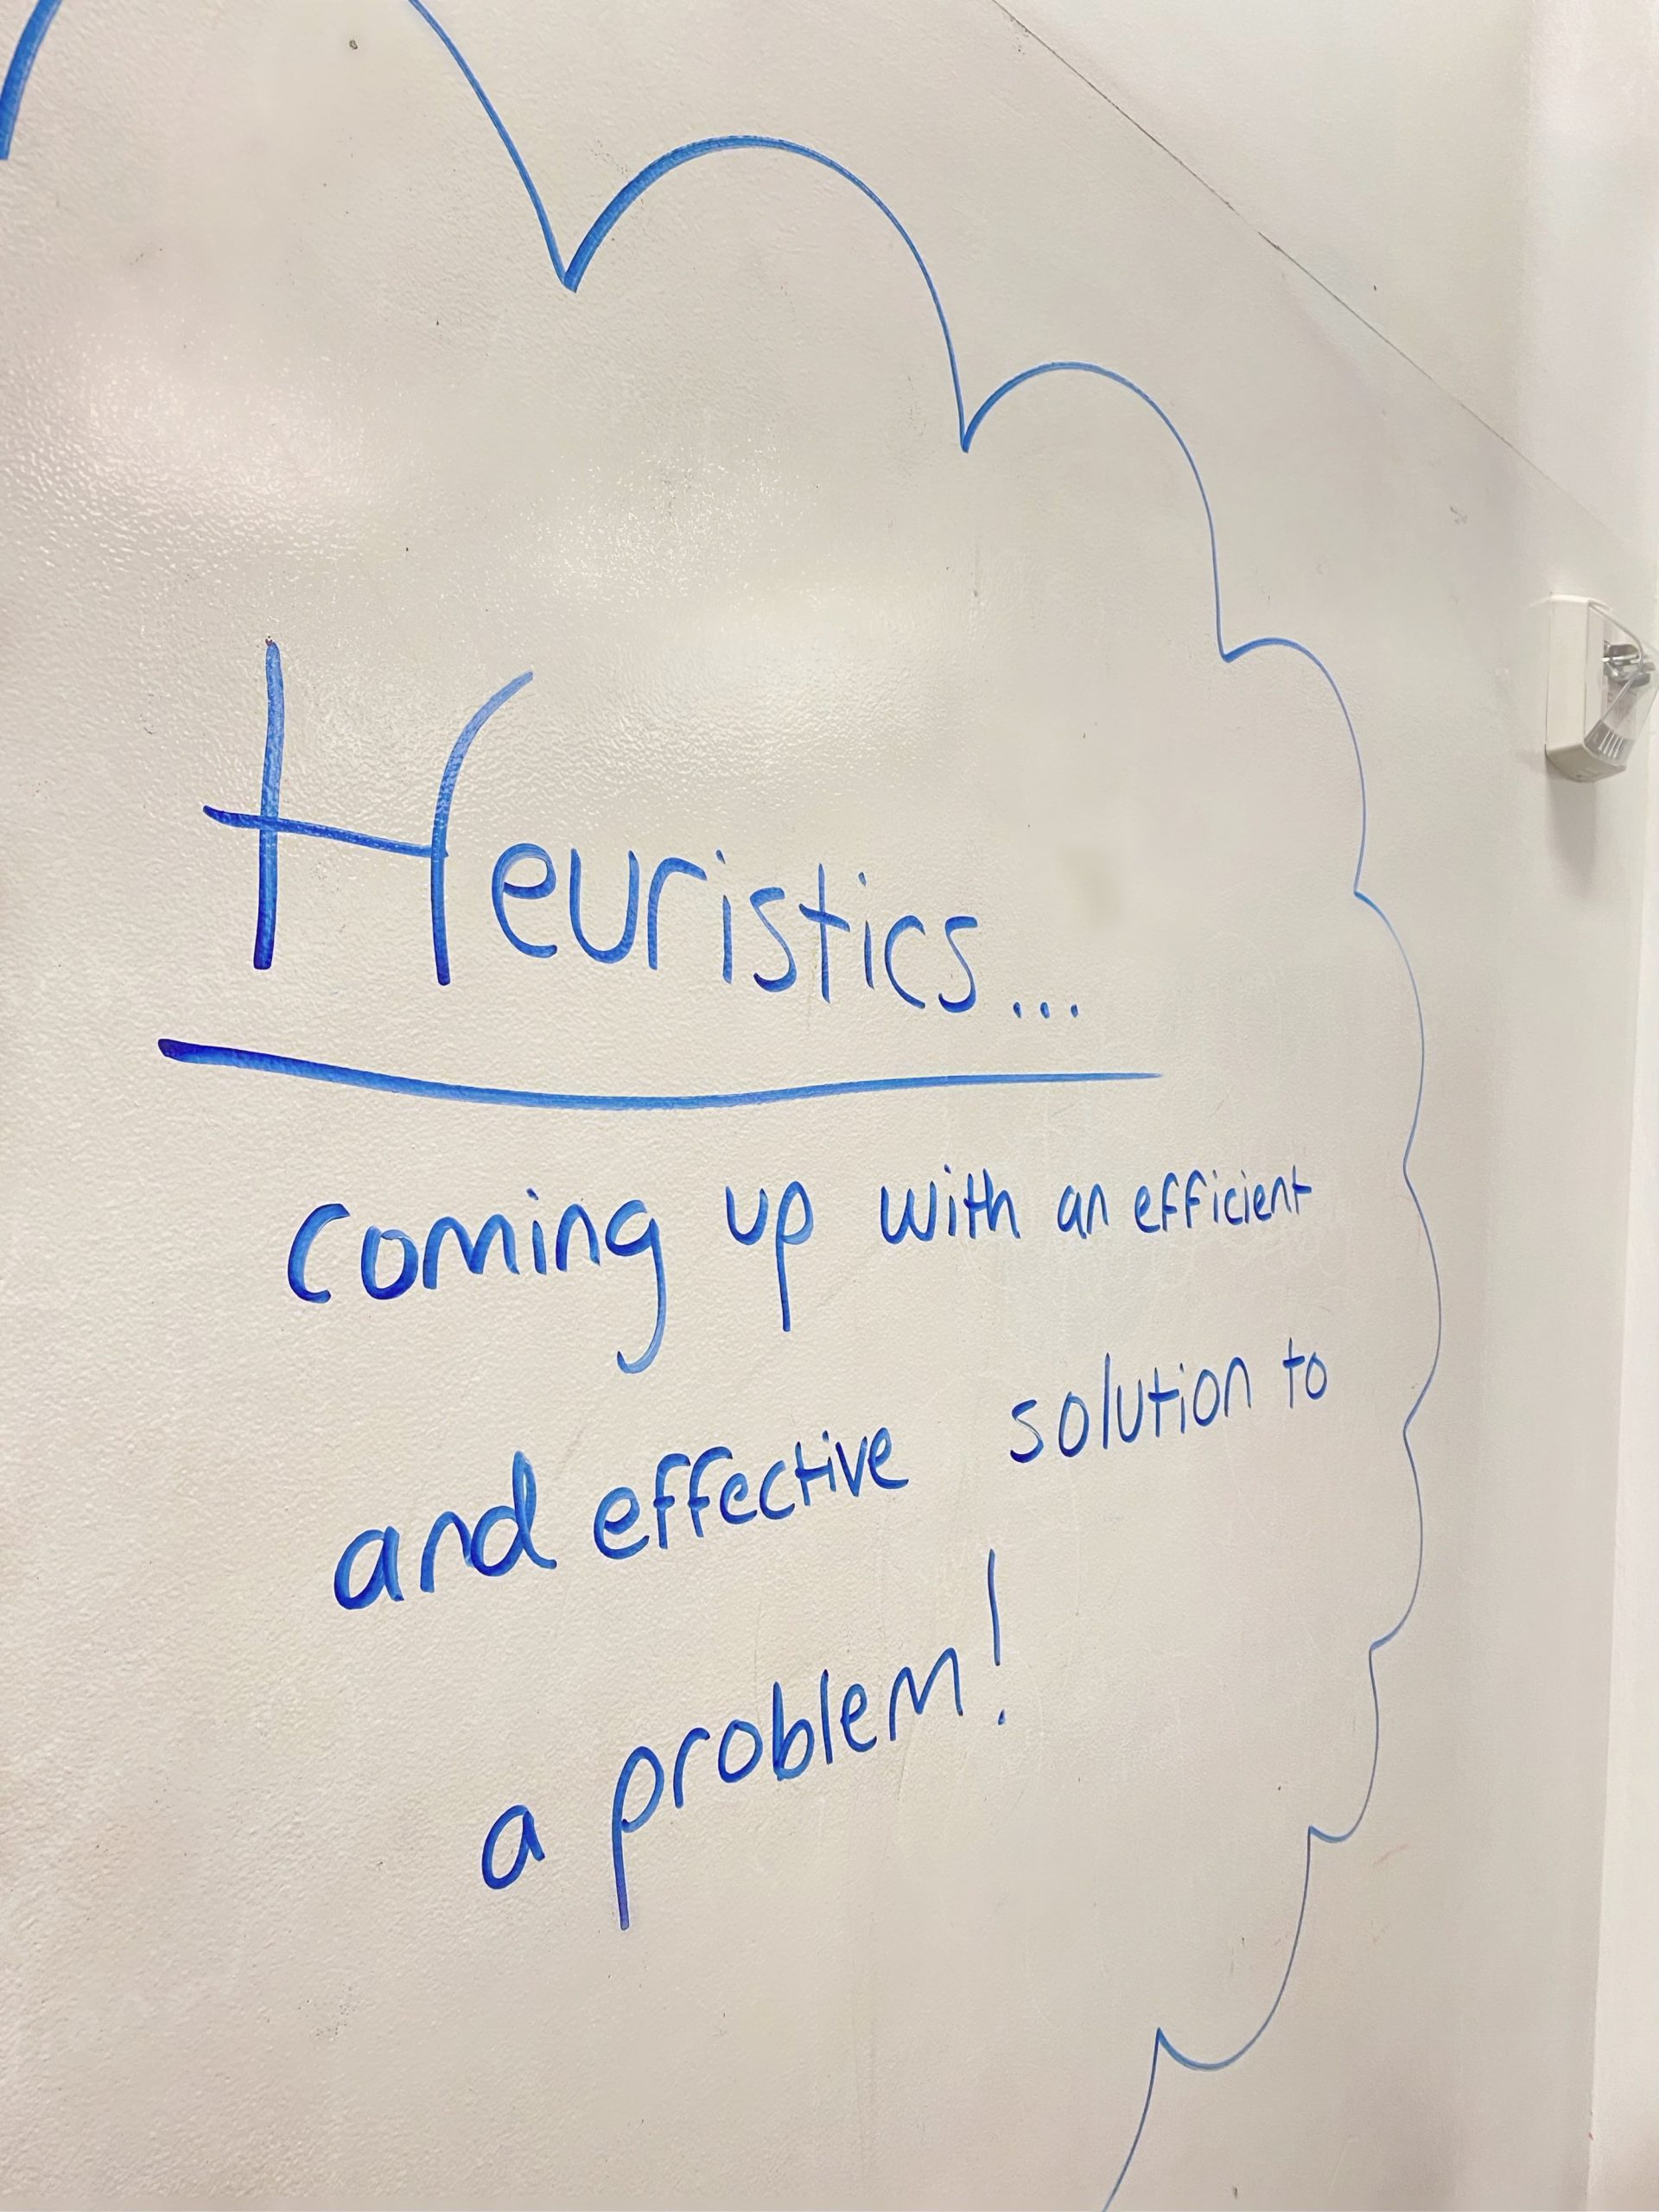 Whiteboard with heuristics notes written in blue whiteboard marker